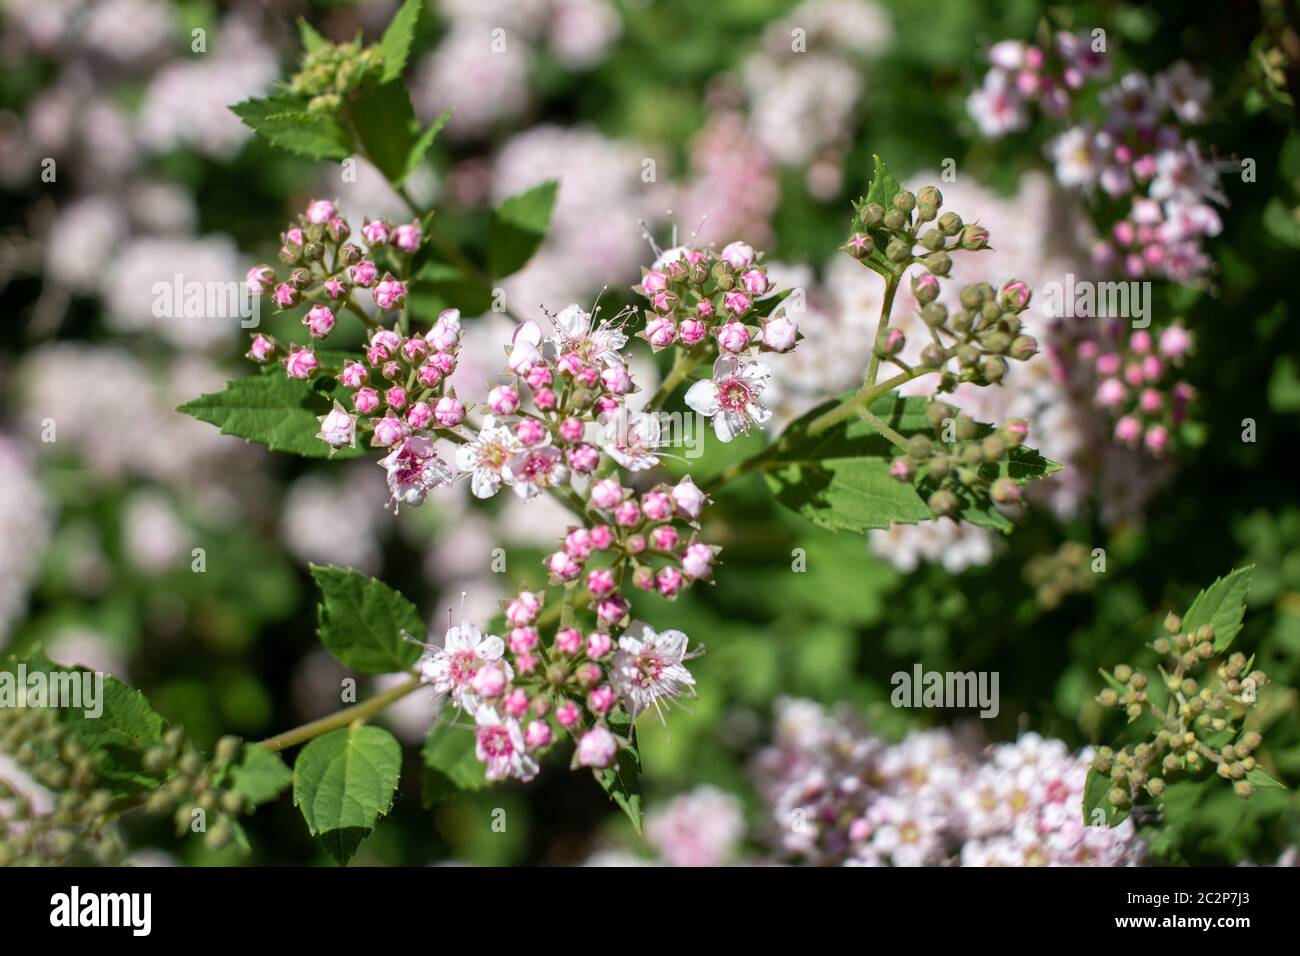 Close up view of beautiful pink buds and blossoms on a compact spirea (spiraea) bush in summer Stock Photo